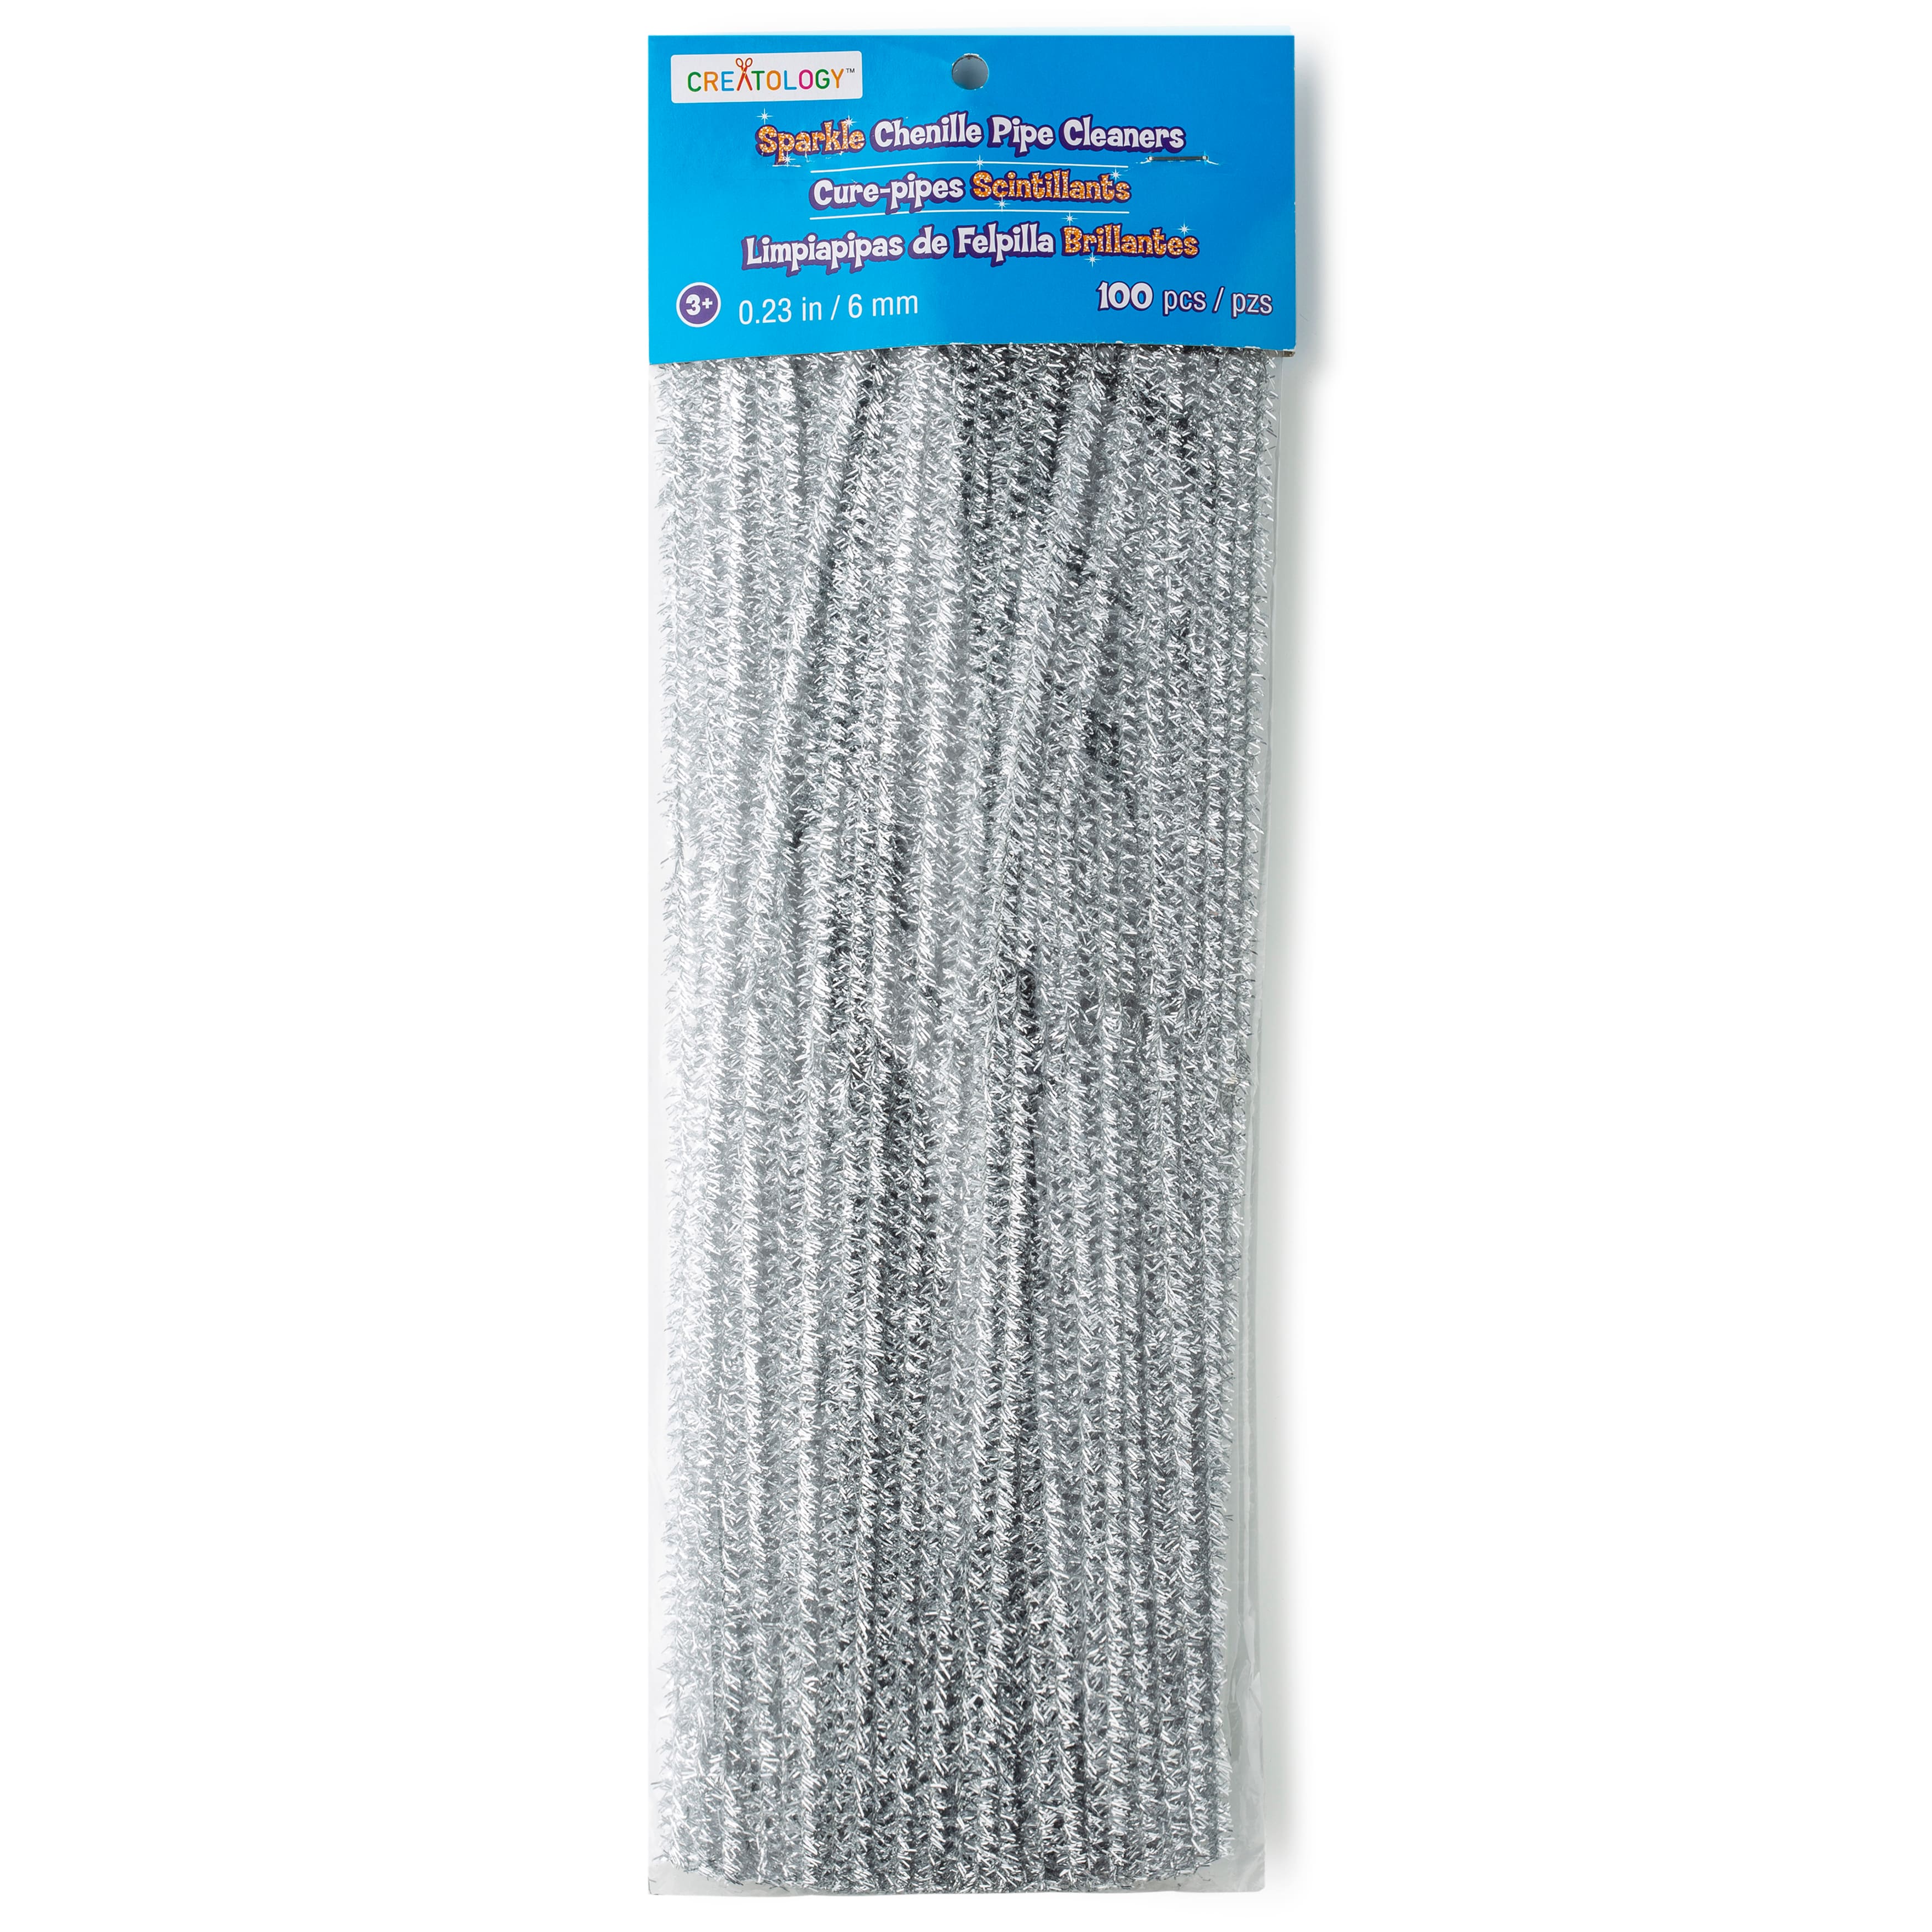 12 Packs: 100 ct. (1,200 total) Black Glitter Chenille Pipe Cleaners by  Creatology™